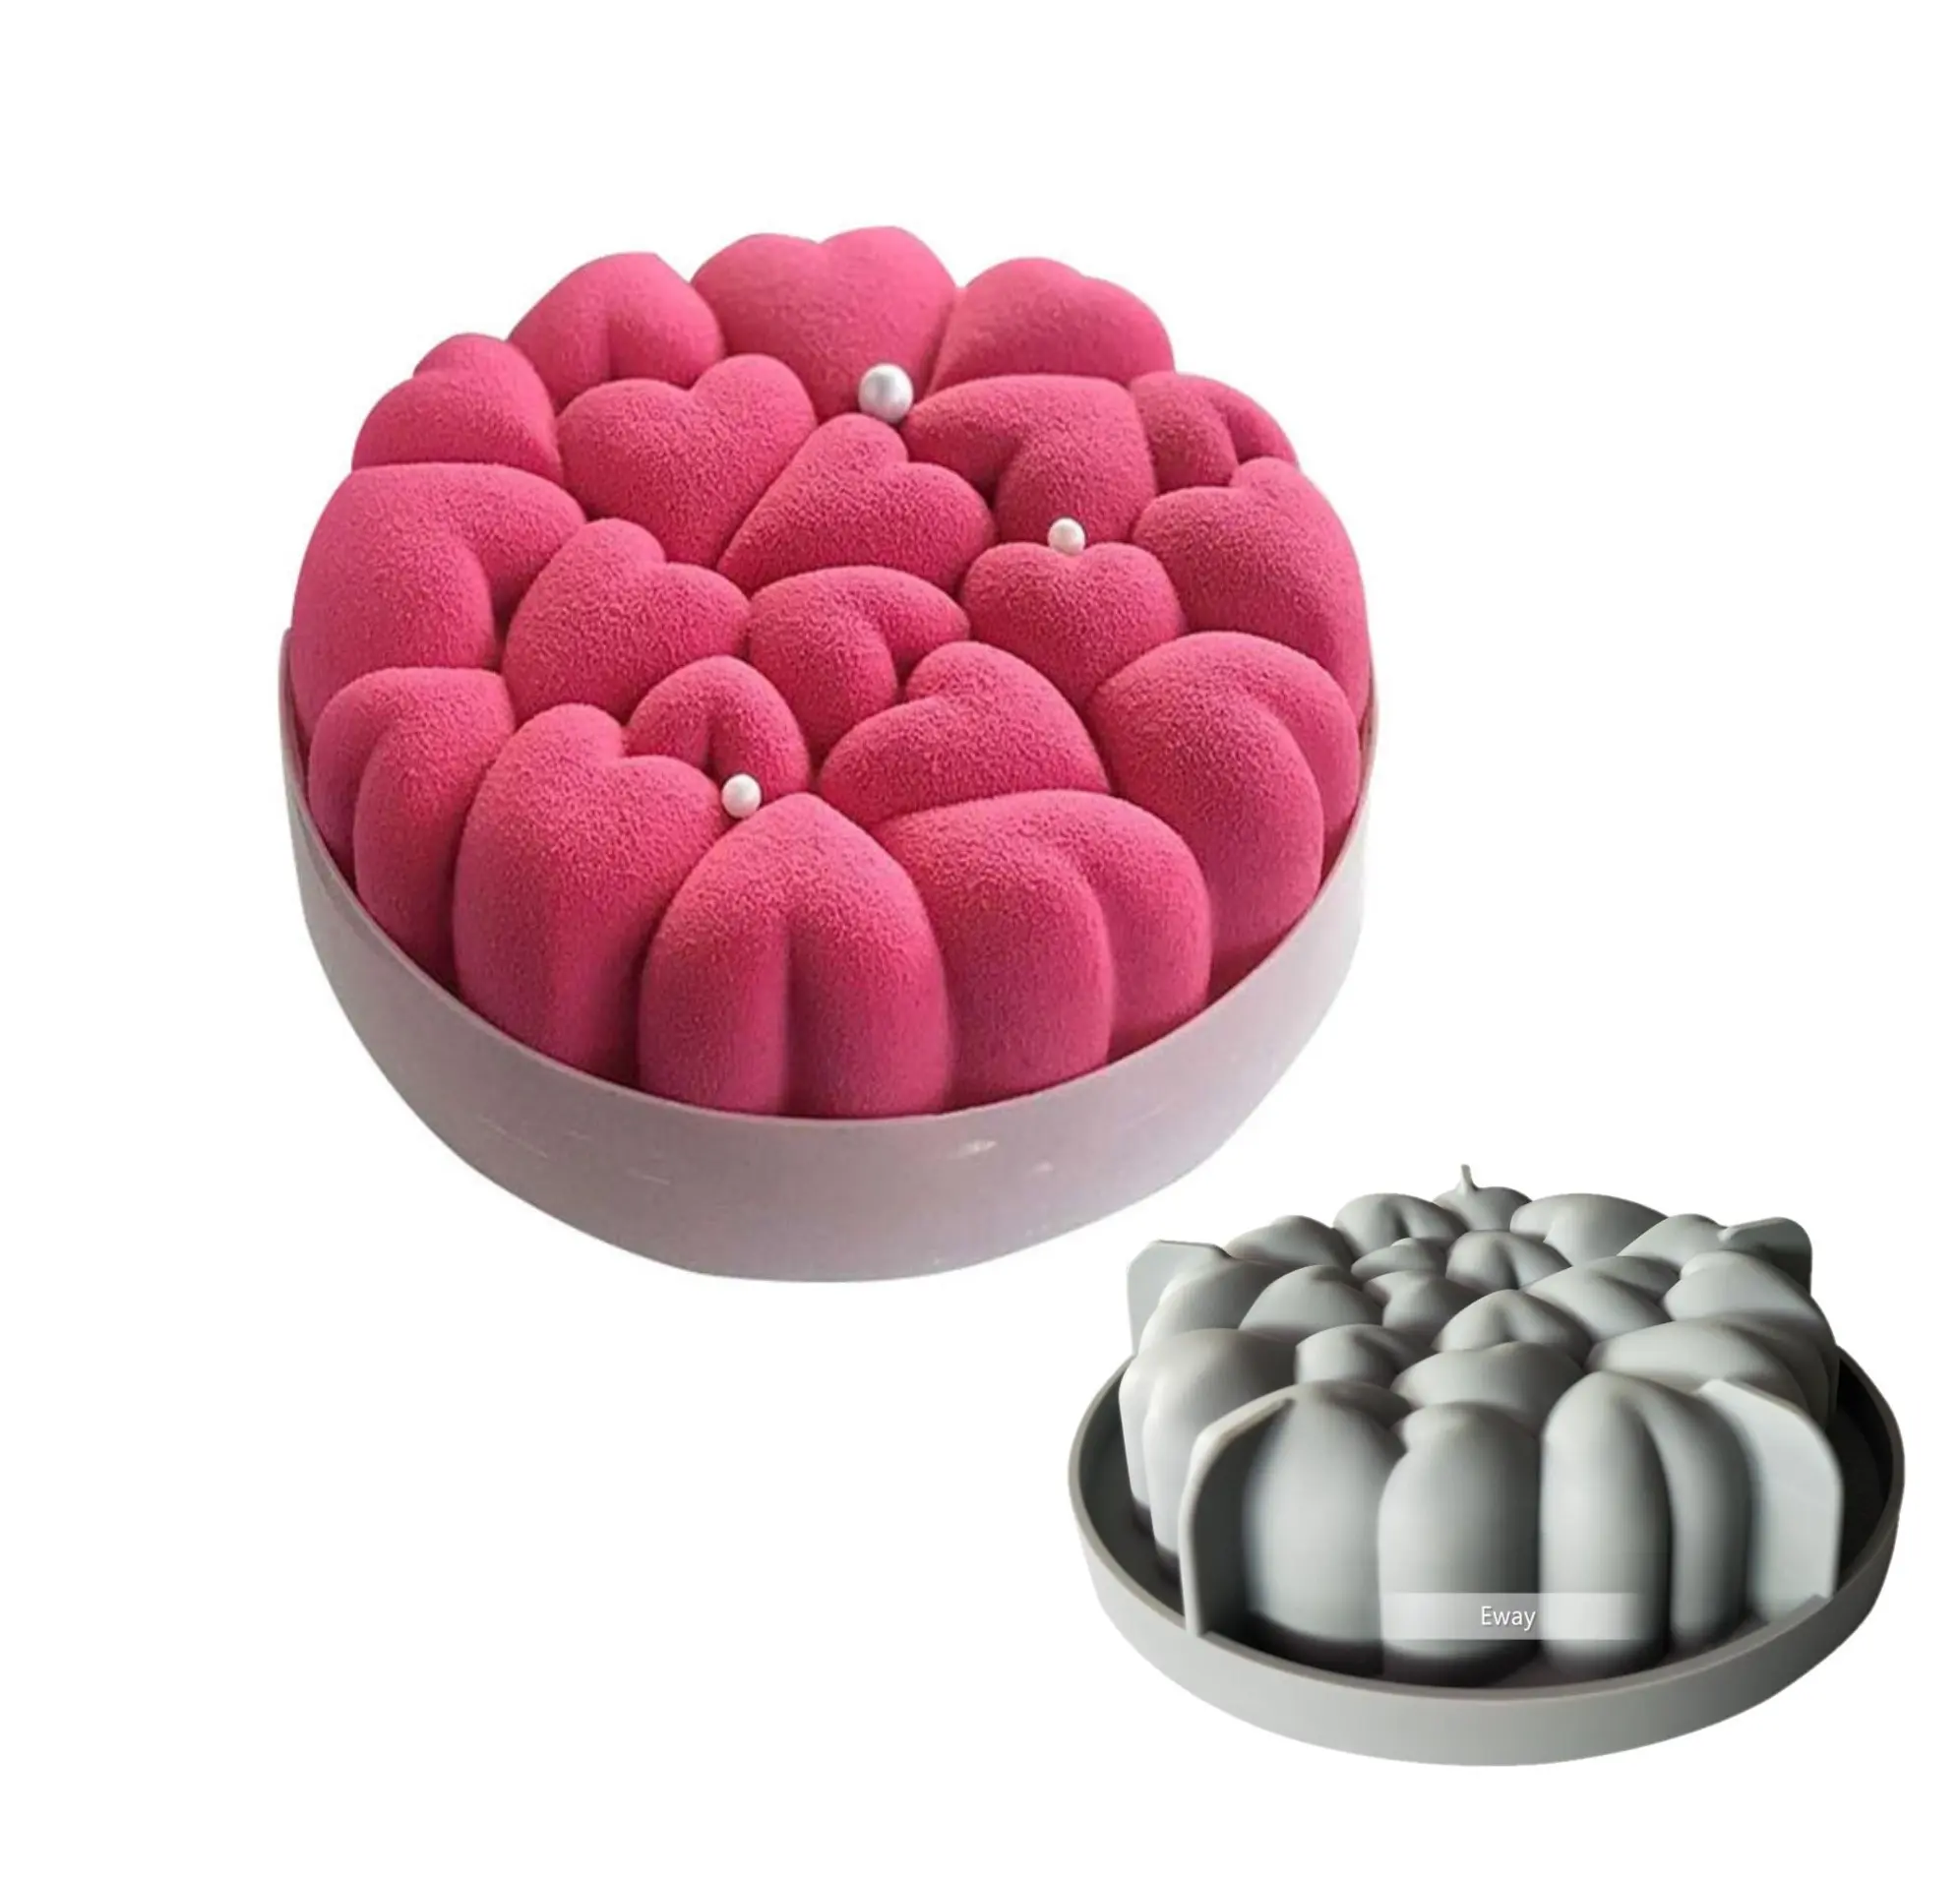 Mothers day valentine's Heart love silicone mold cake pop mould cheese cake fixed mould for birthday gifts